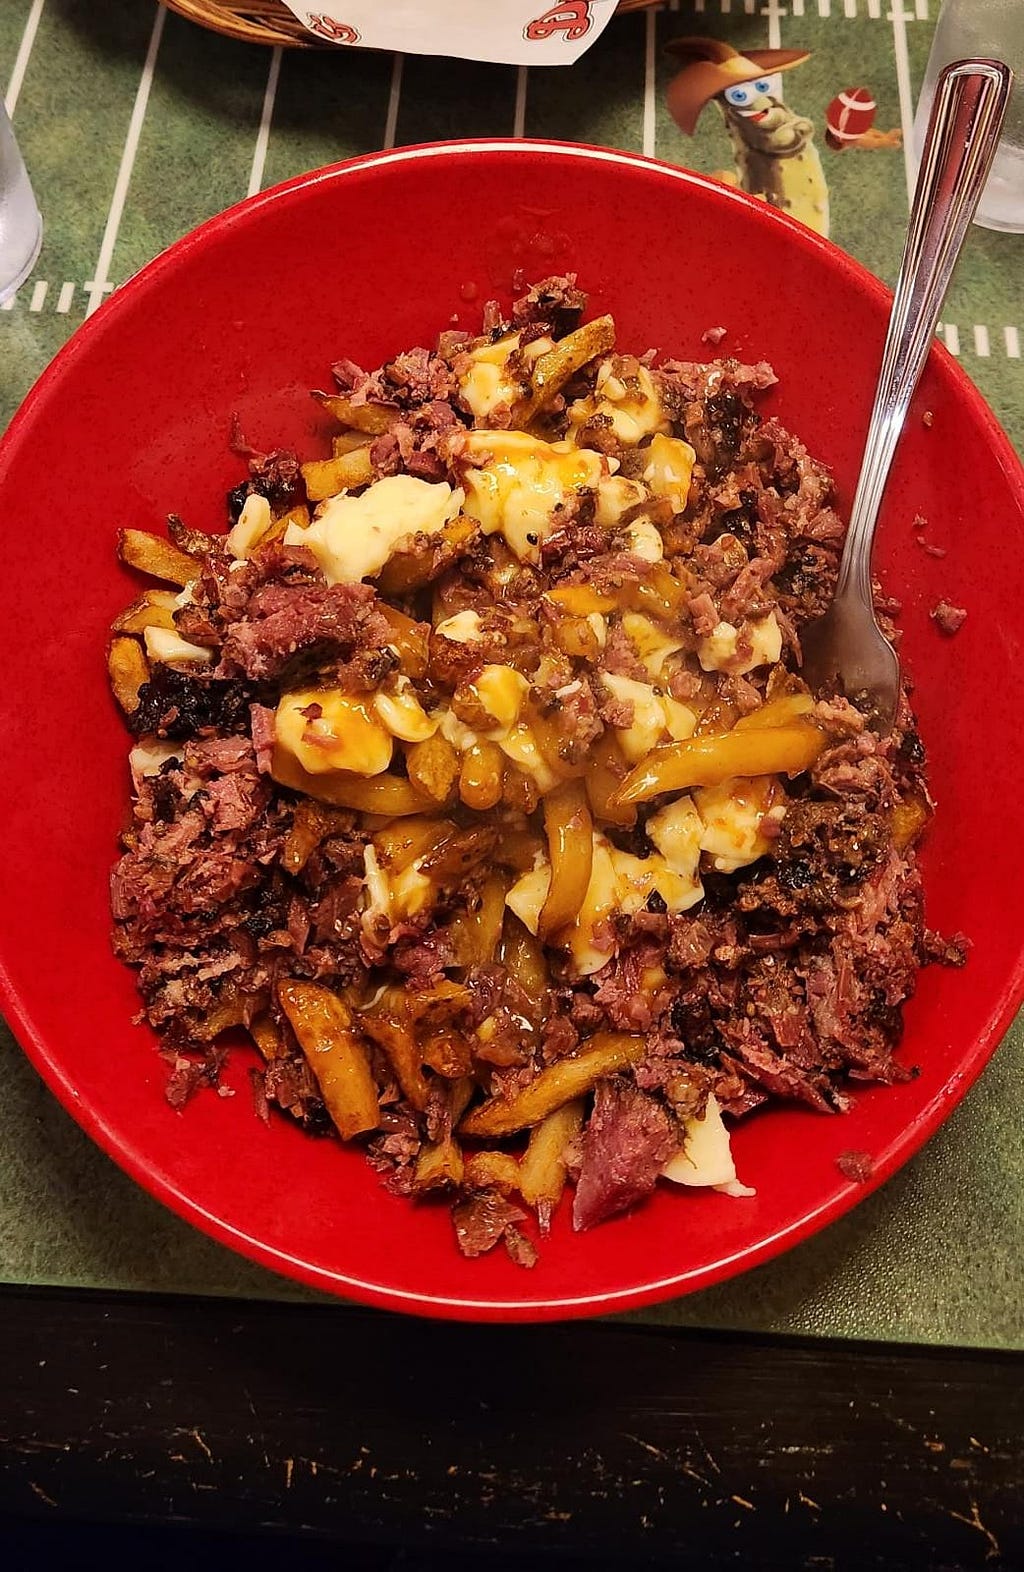 DUNN’S FAMOUS | The Québécoise poutine with Dunn’s famous smoked meat.